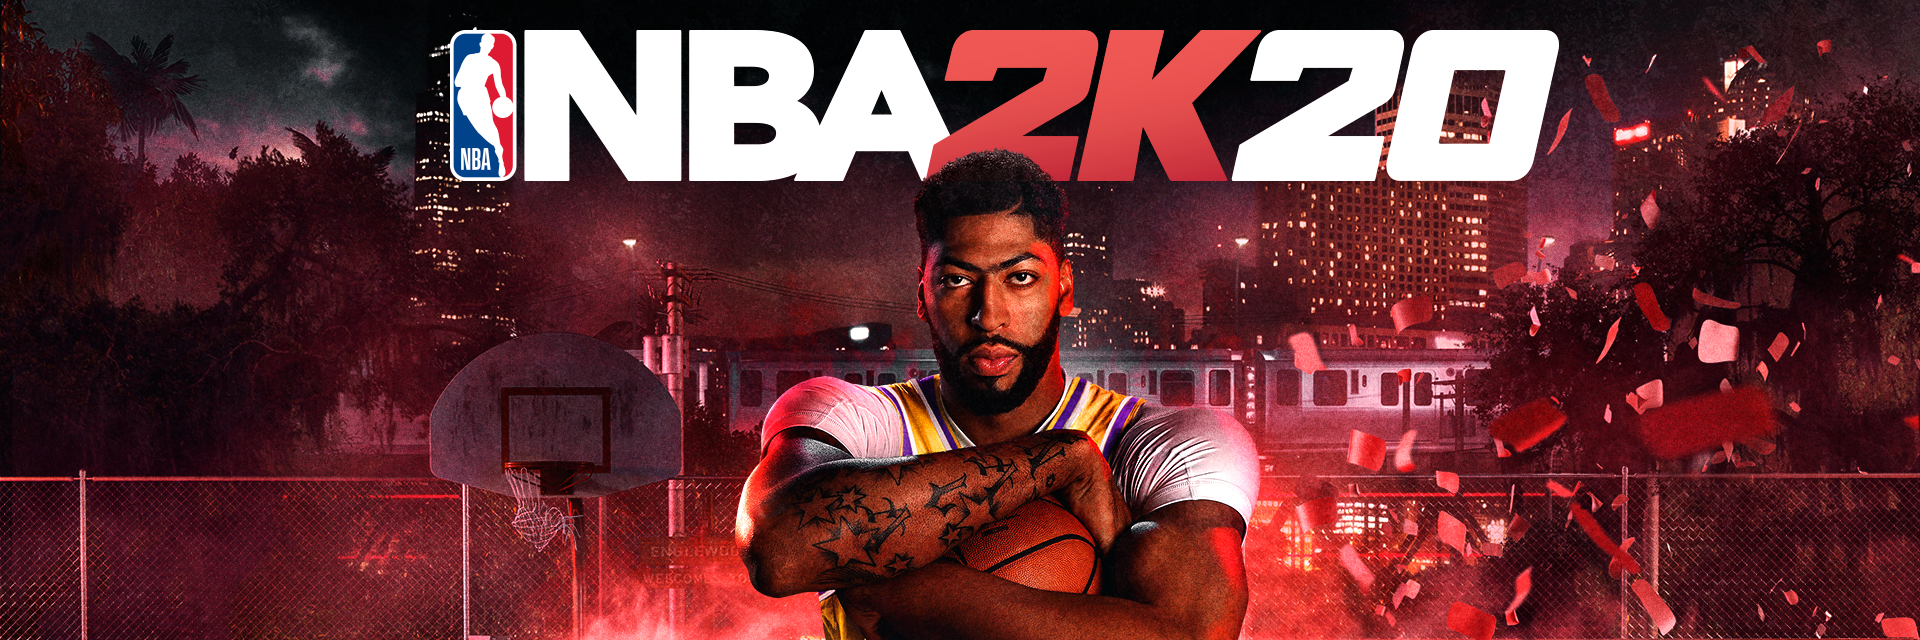 Get NBA 2k20 Free for PC a latest video game